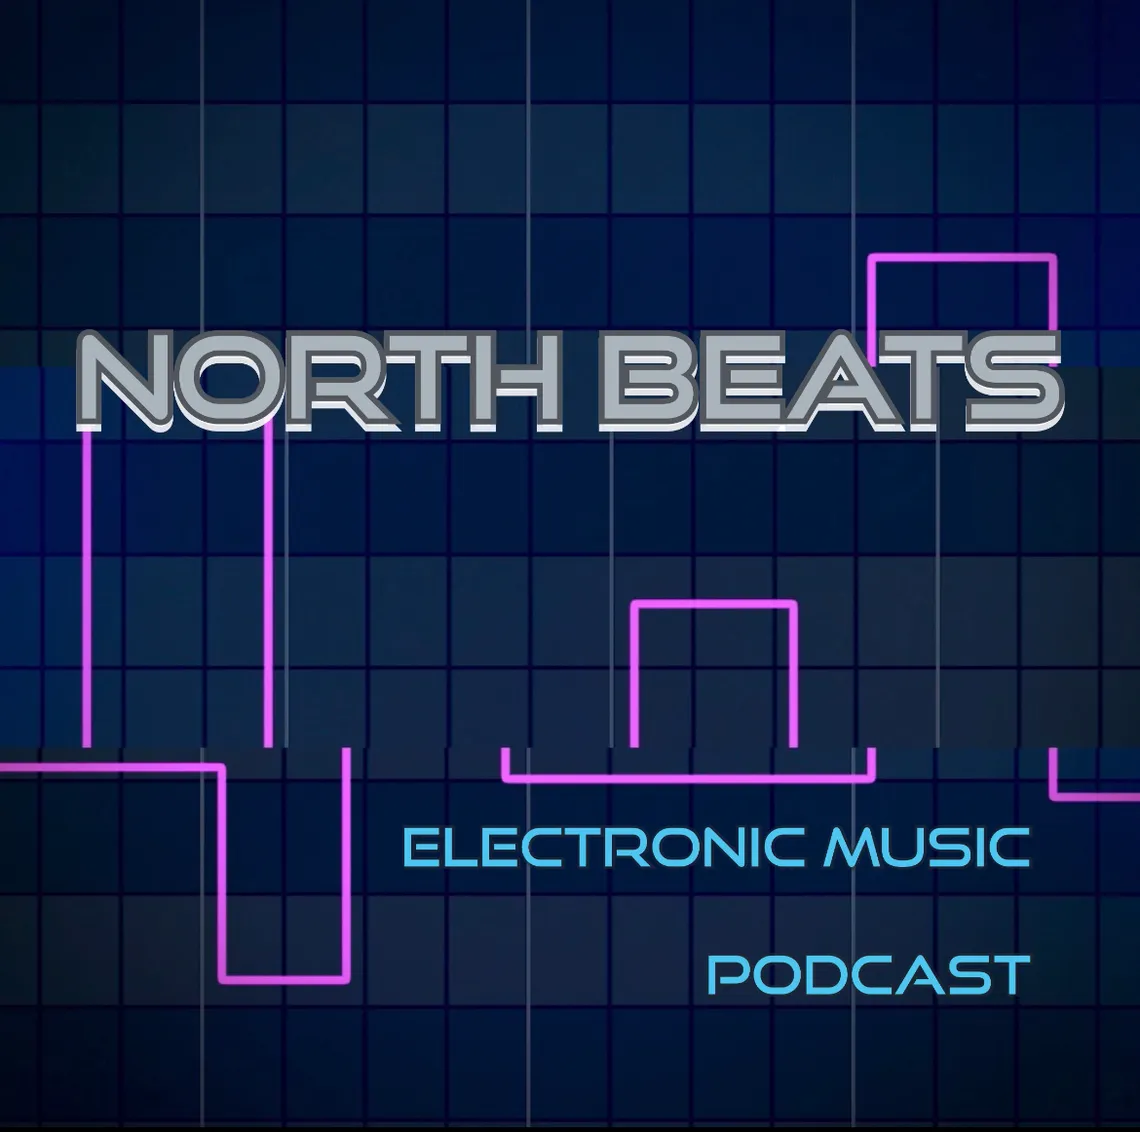 Steve McQuarry interview on North Beats podcast